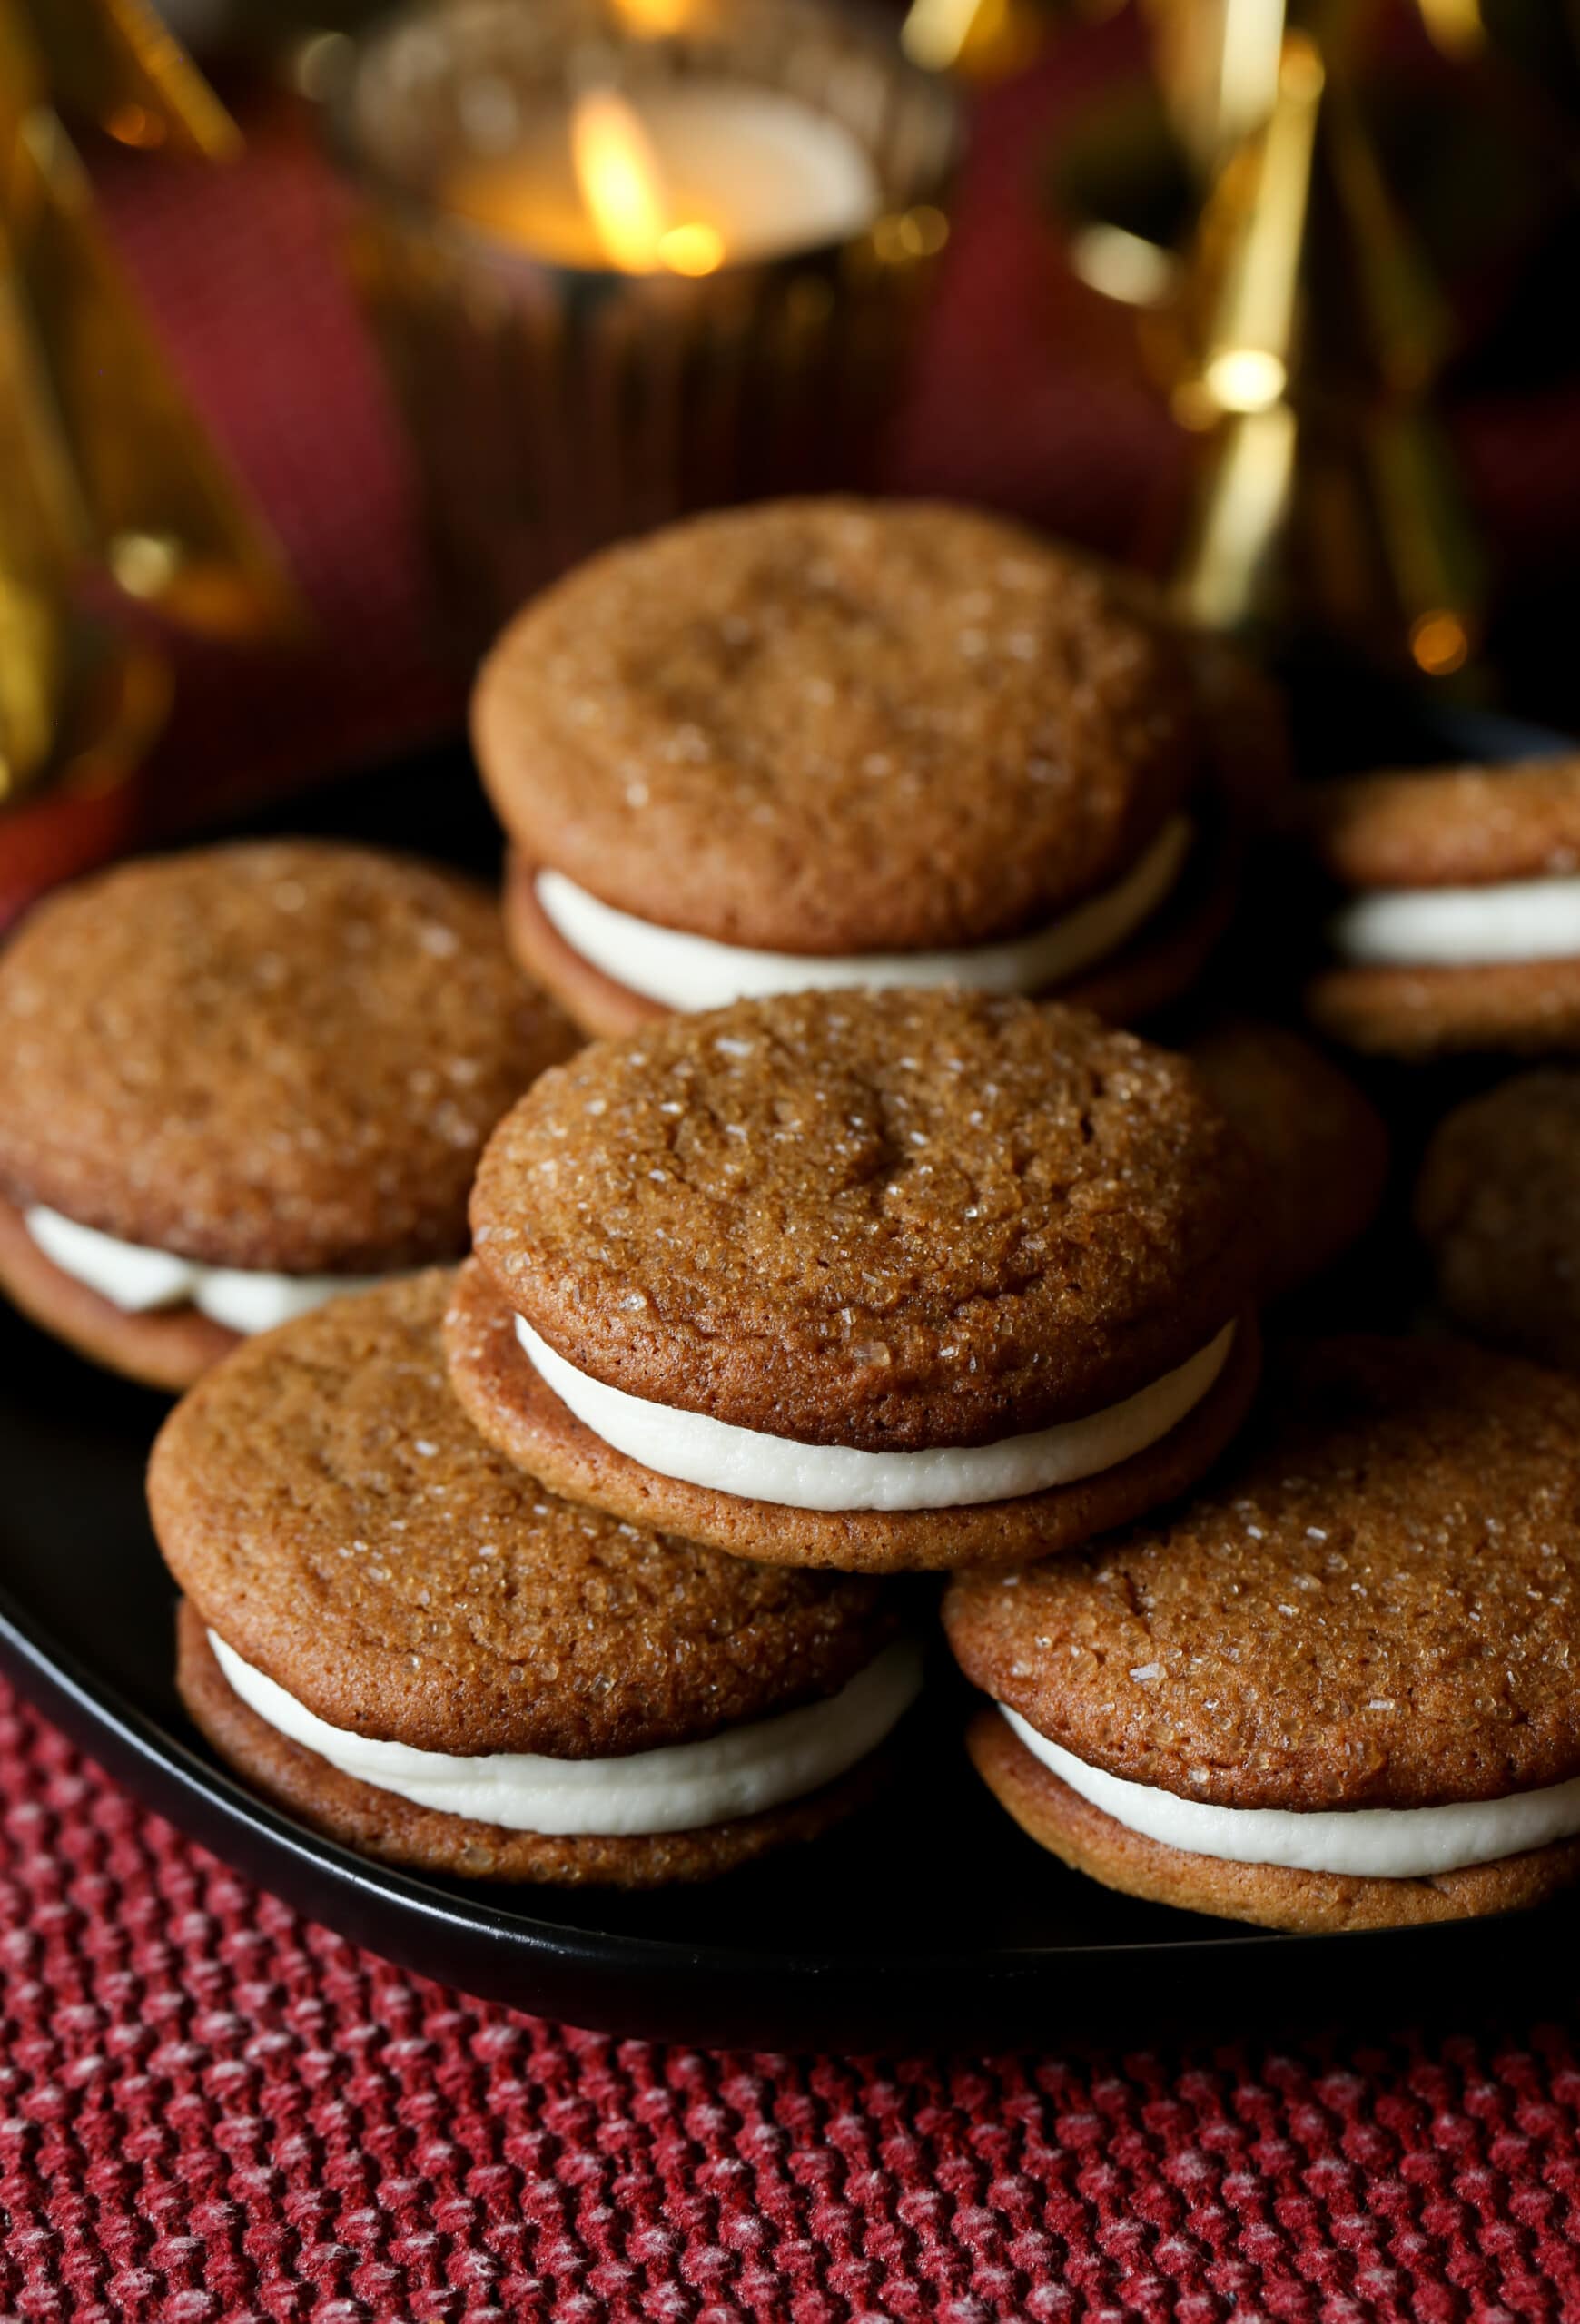 A pile of gingerbread sandwiches on a plate